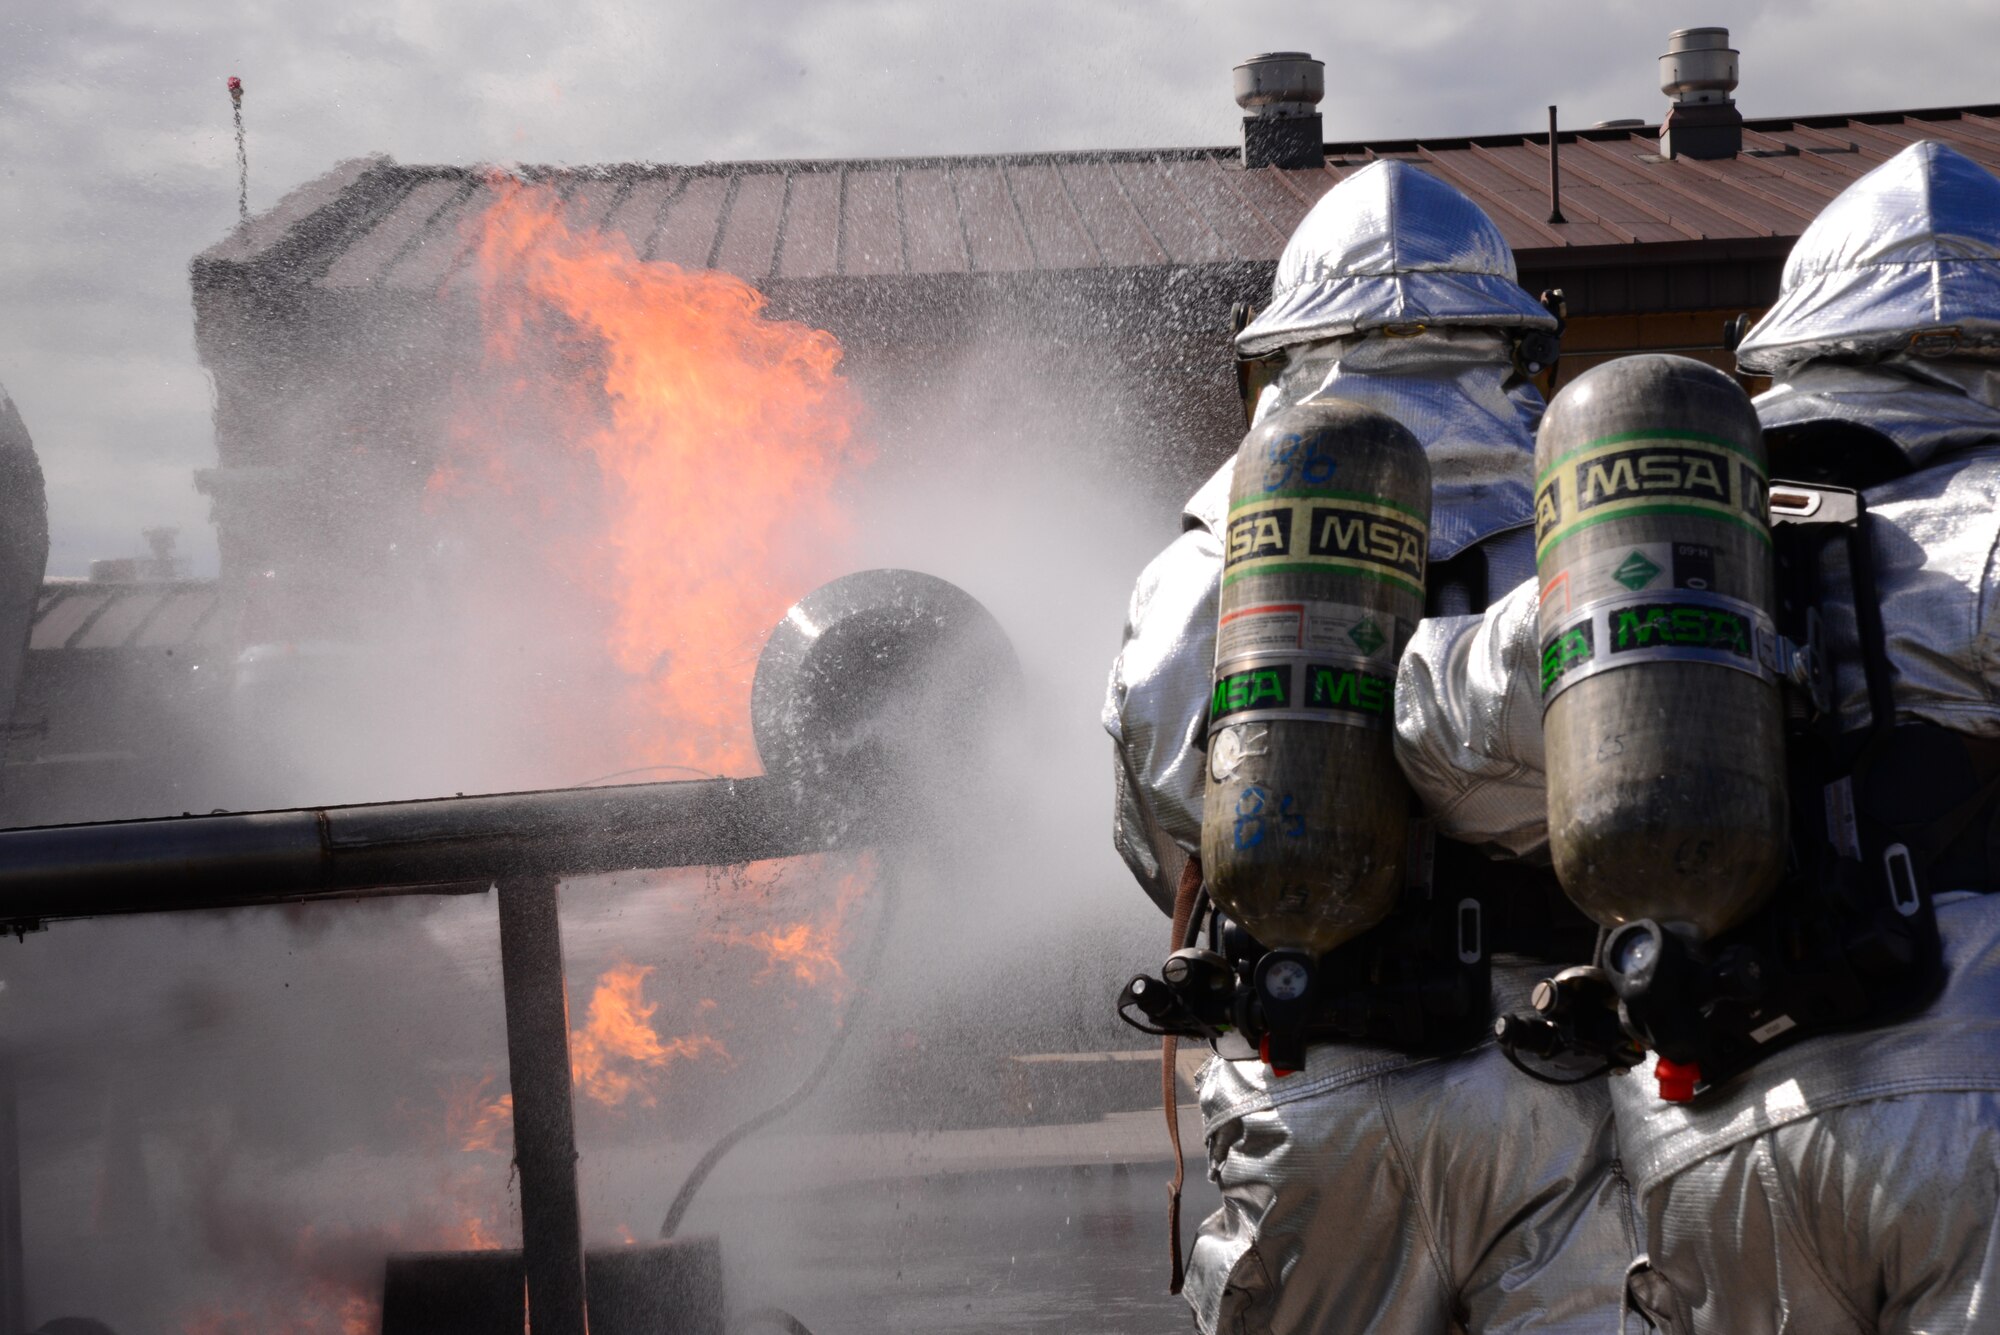 Firefighters from the Songtan fire station practice putting out an aircraft fire Aug 26, 2015, at Osan Air Base, Republic of Korea. Firefighters from the 51st Civil Engineer Squadron, Republic of Korea air force and Songtan fire stations came together to practice aircraft accident firefighting techniques. (U. S. Air Force photo by Staff Sgt. Benjamin Sutton) 